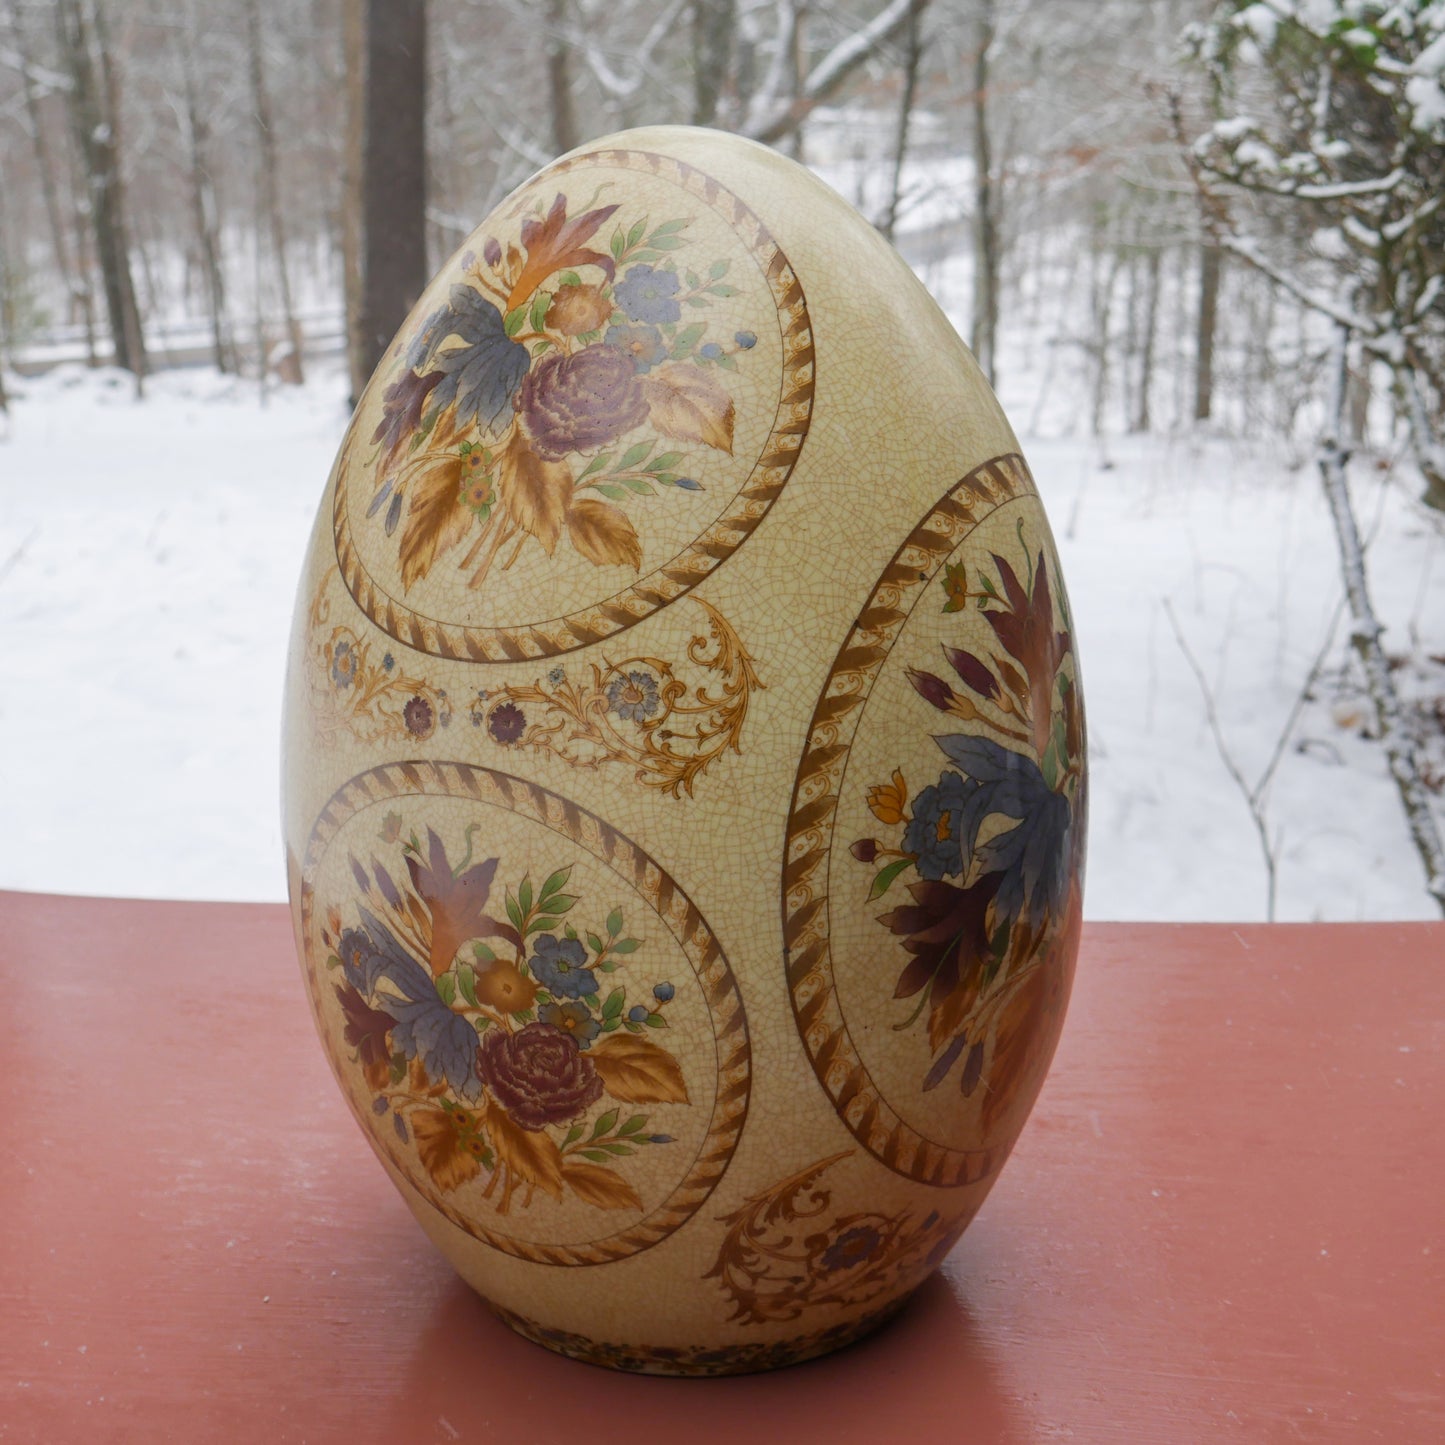 Huge Ceramic Egg 18" Tall | 14 Pounds Giant Handcrafted and Hand Painted Egg VTG